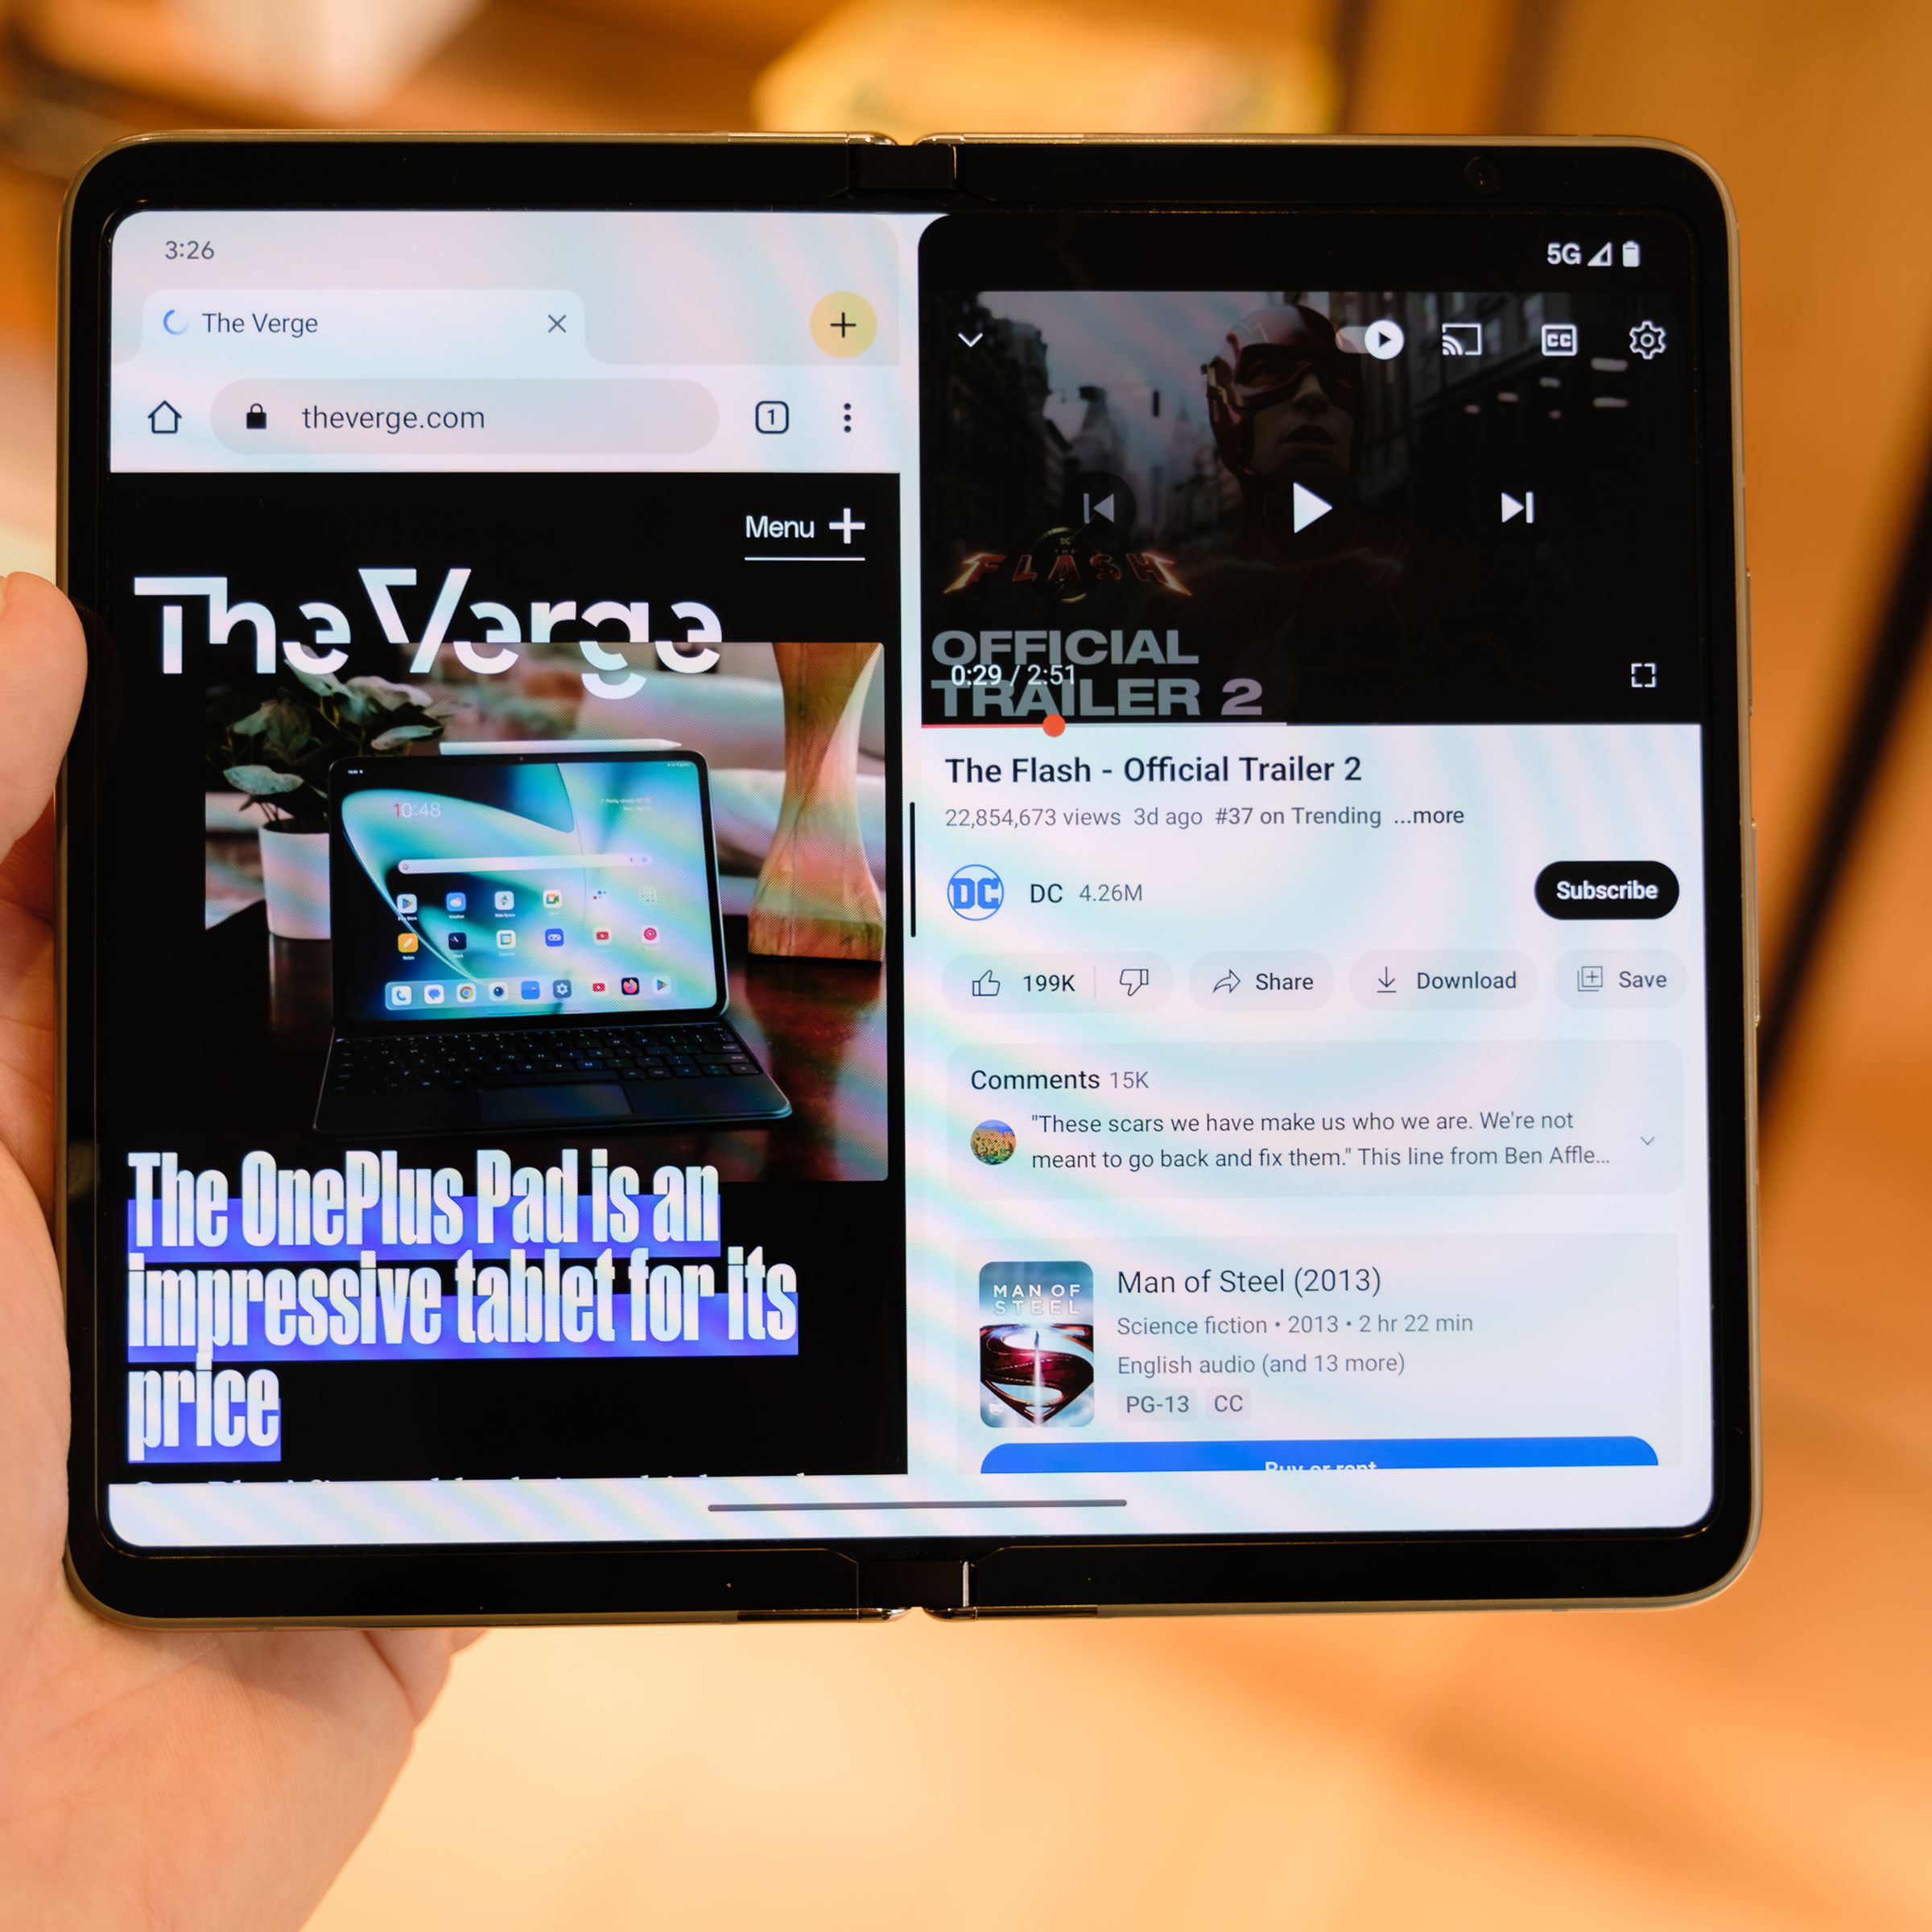 A Pixel Fold with both a browser and the YouTube app open at the same time in split-screen mode.